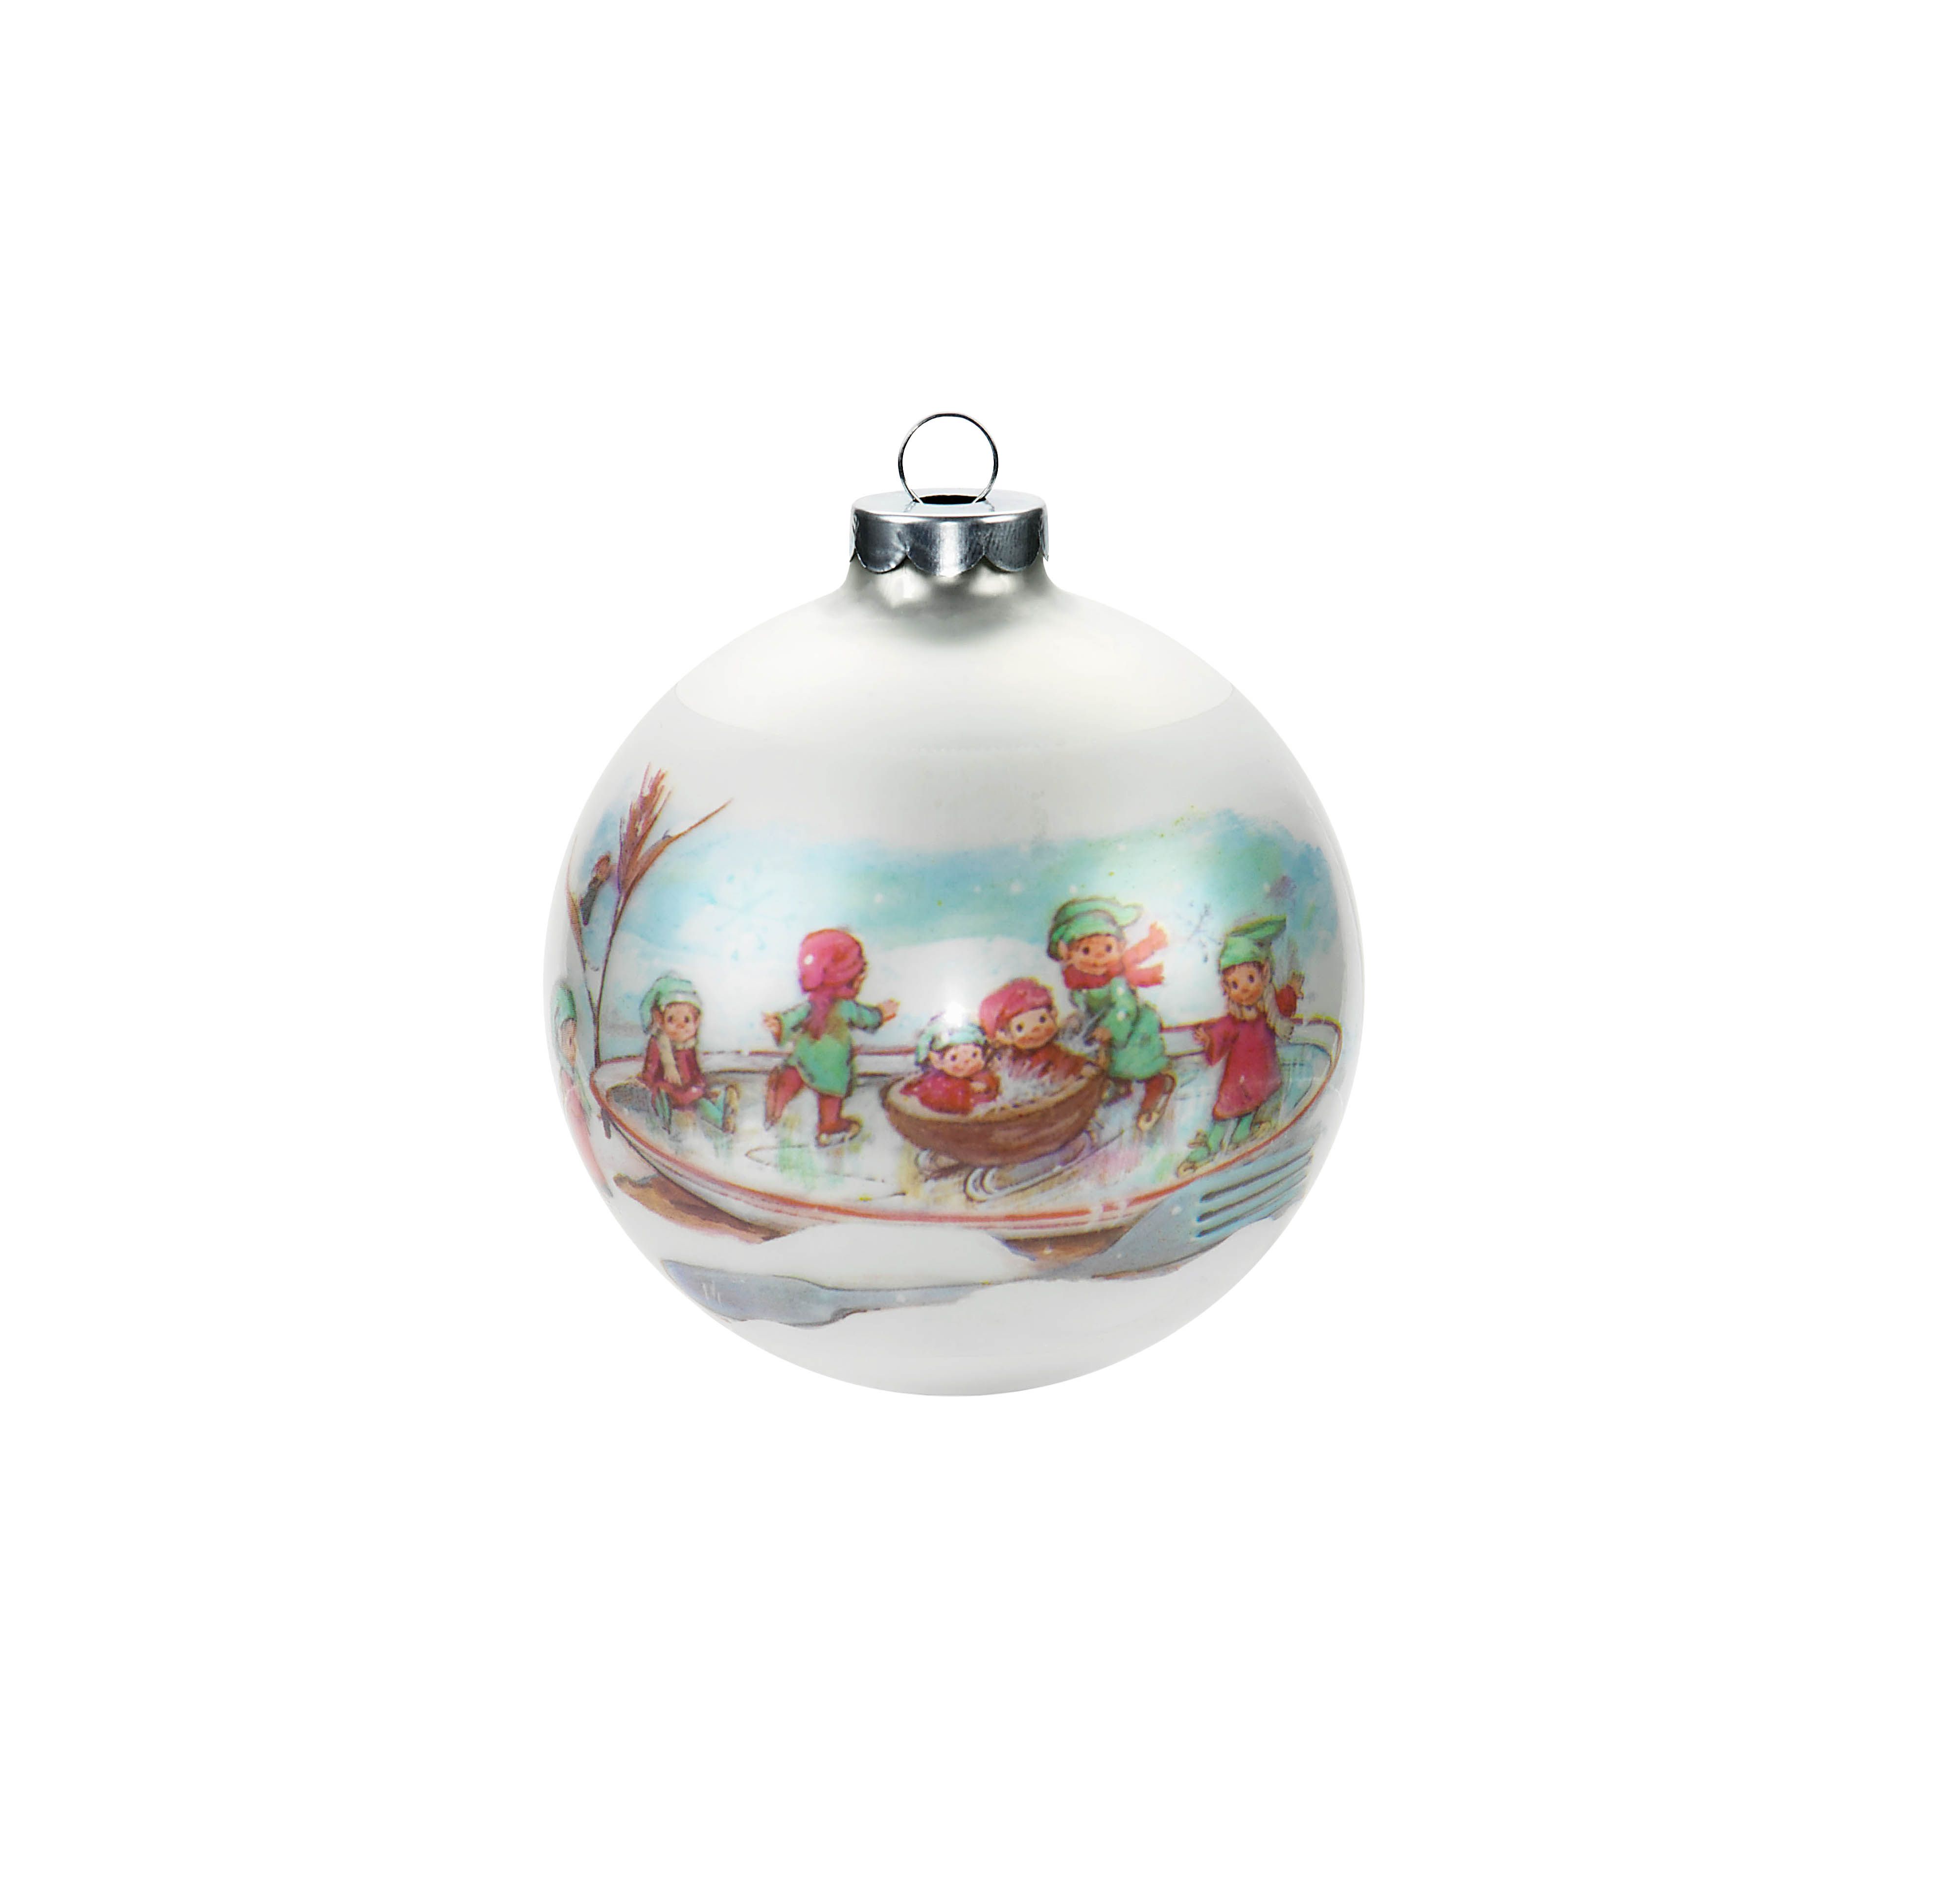 In Box! Dated 1981 Hallmark "First Christmas Together" Glass Keepsake Ornament 